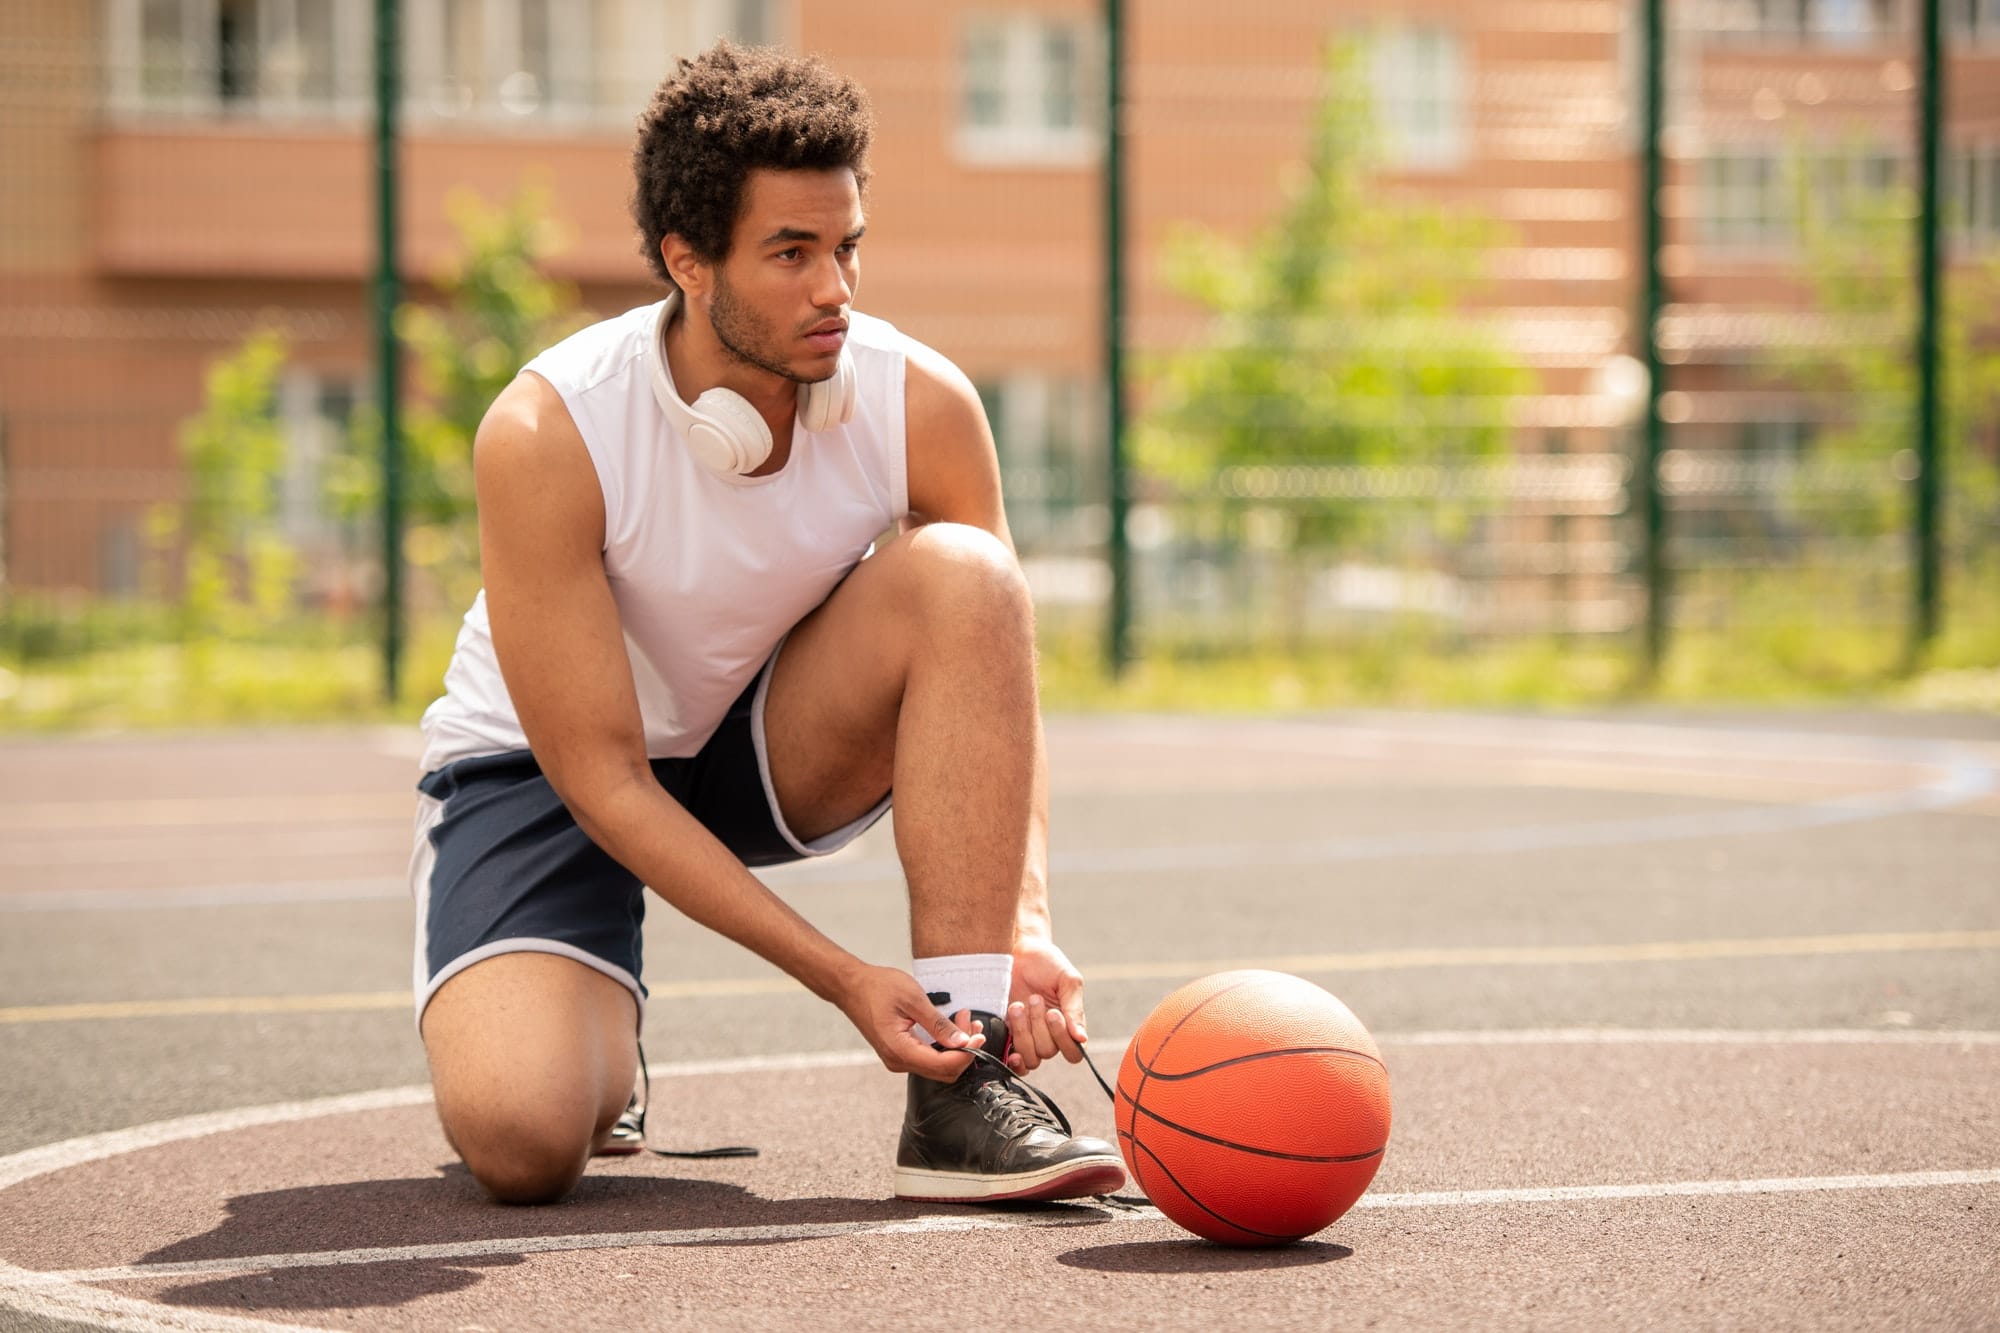 Young professional basketball player tying shoelace of sneaker